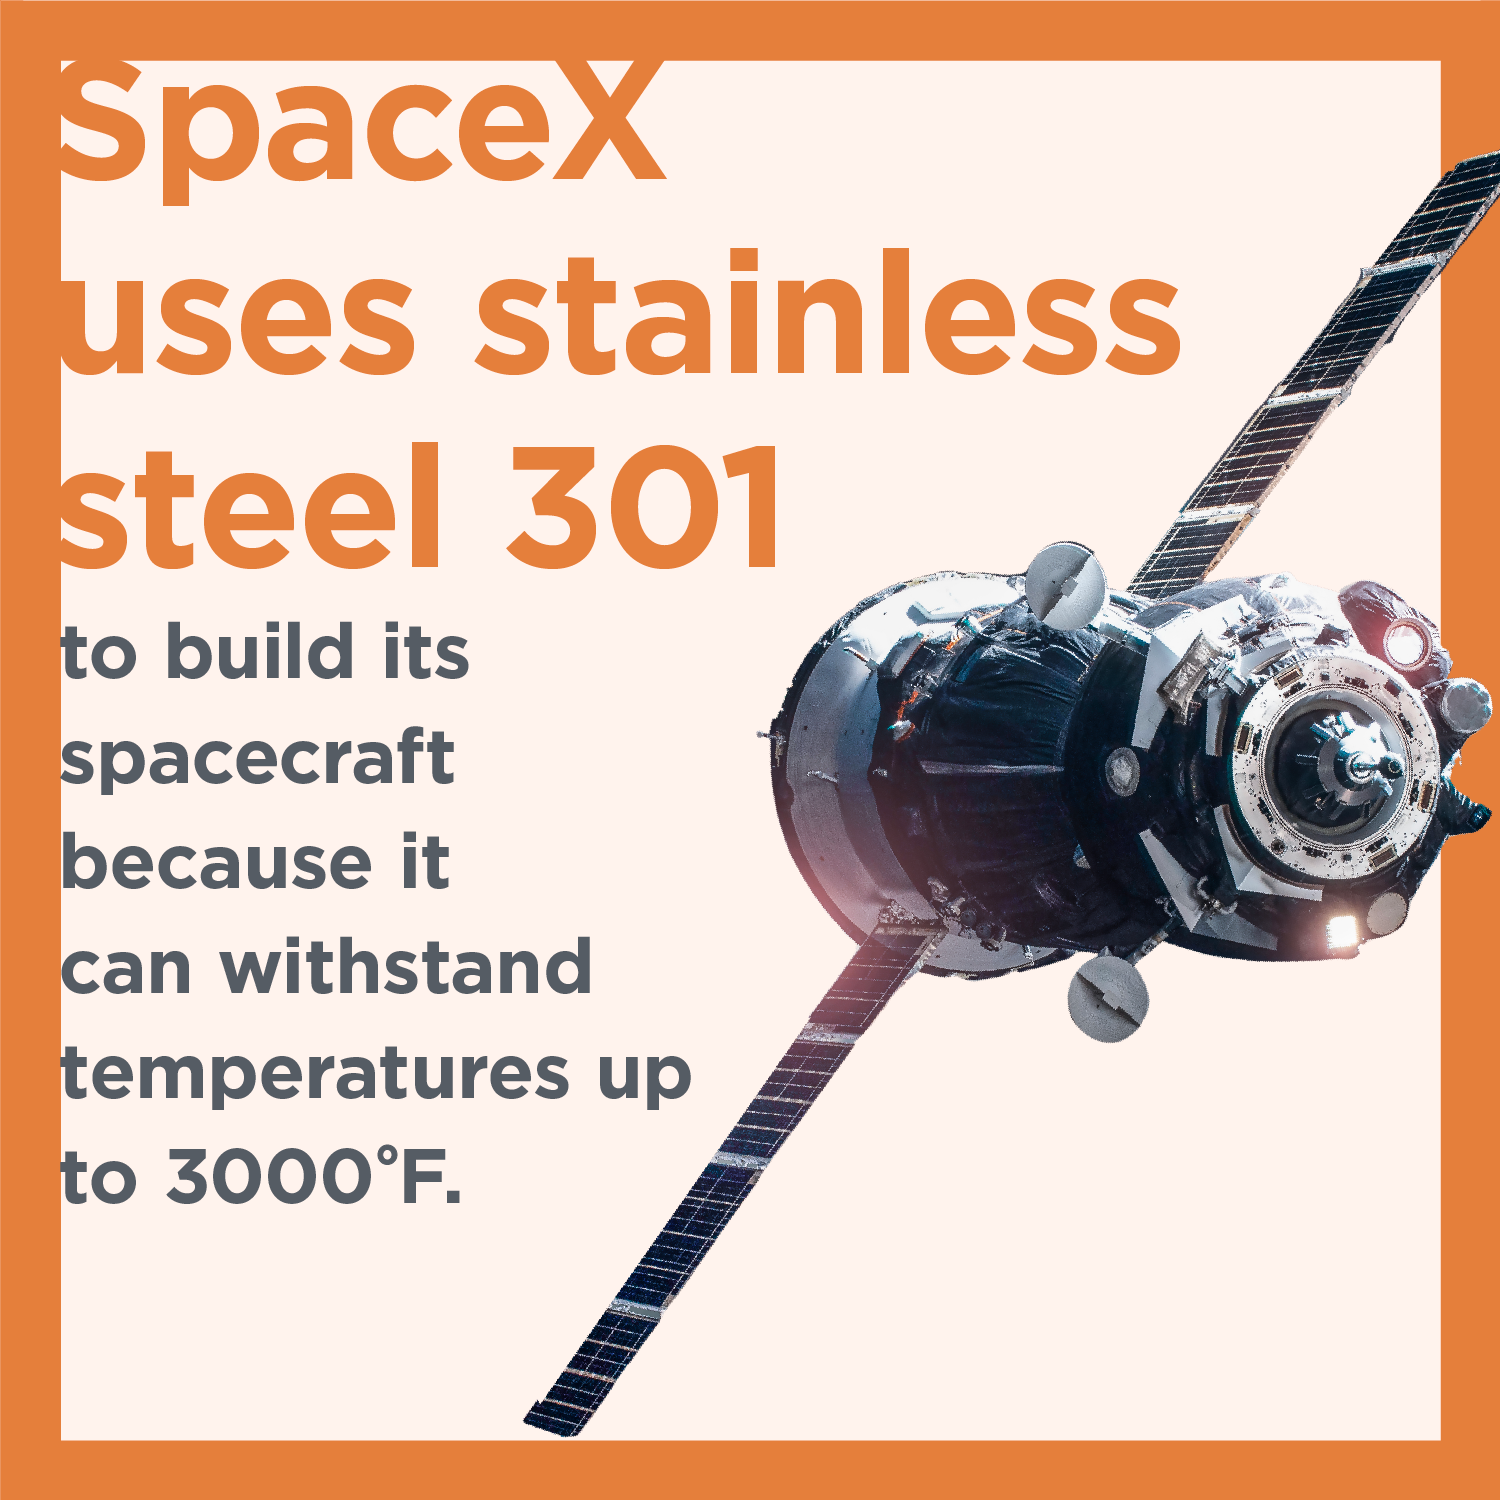 SpaceX uses stainless steel 301 to build its spacecraft because it can withstand temperatures up to 3000F.